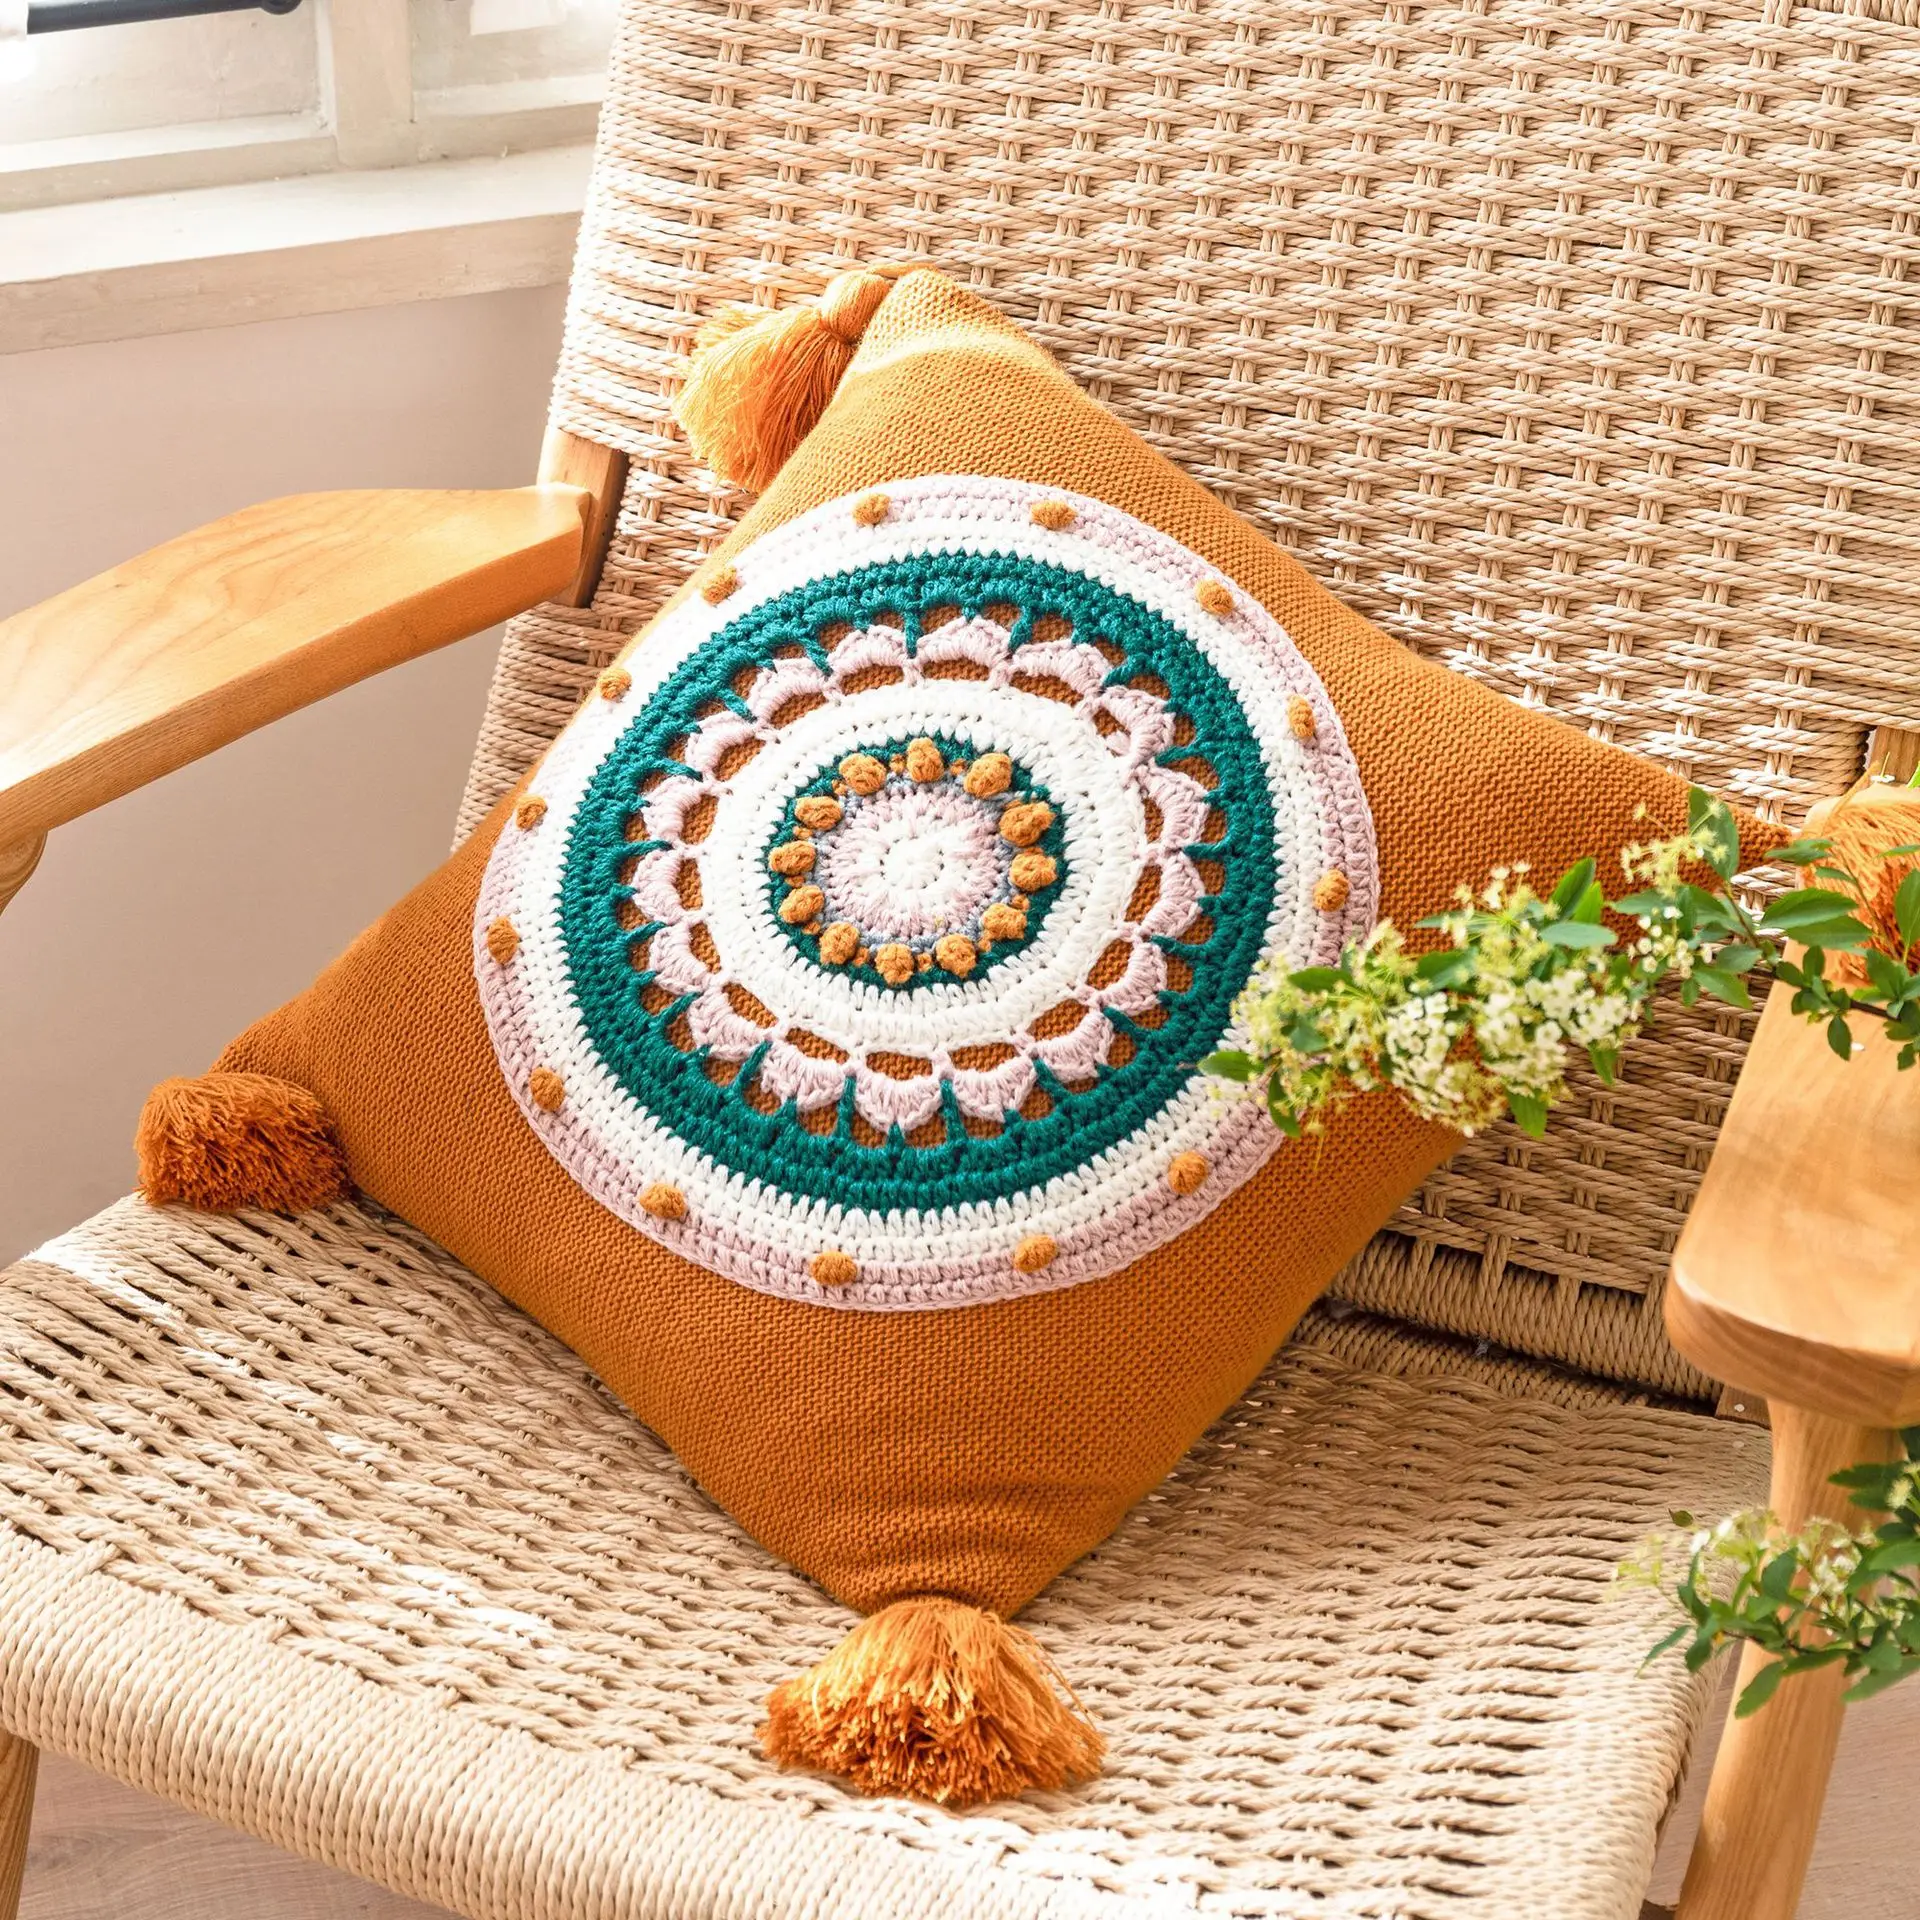 Floral Cuhion Cover Bohemian Floral Woolen Embroidery Pillowcase Tassels Knit Home Living Room Sofa Decoration Pillow Case